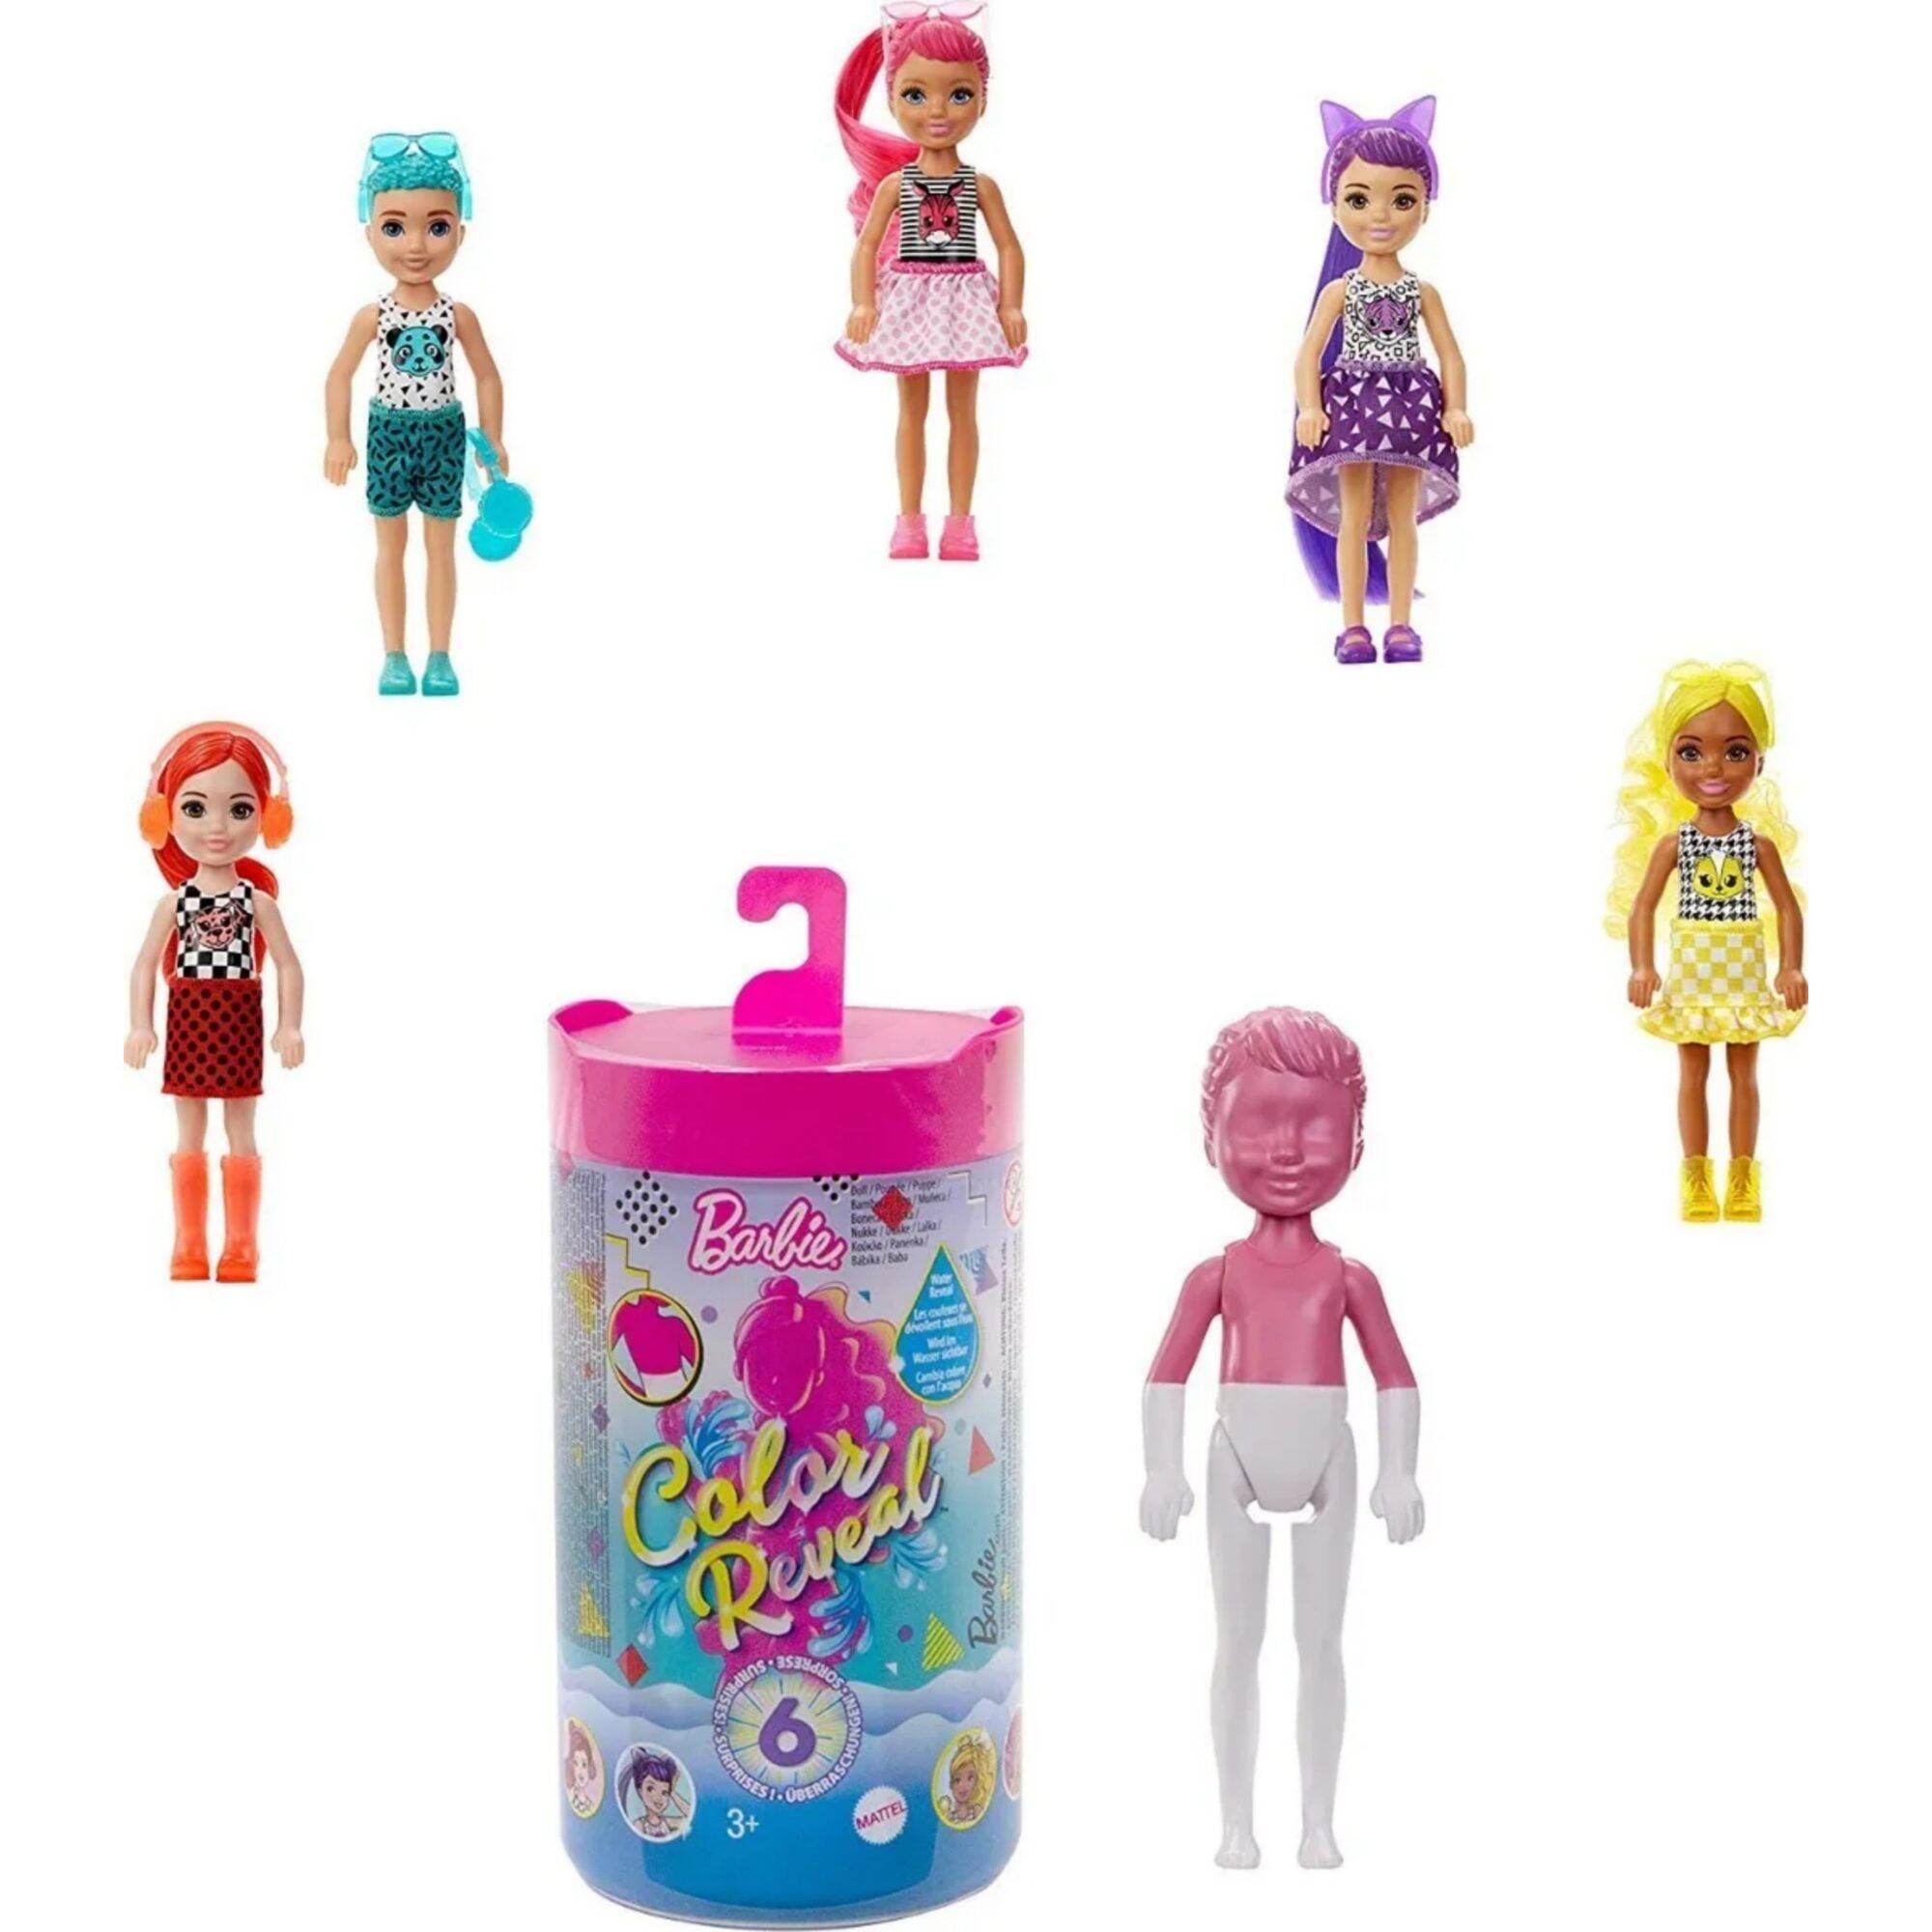 Barbie® Chelsea Color Reveal Doll and 6 Surprises